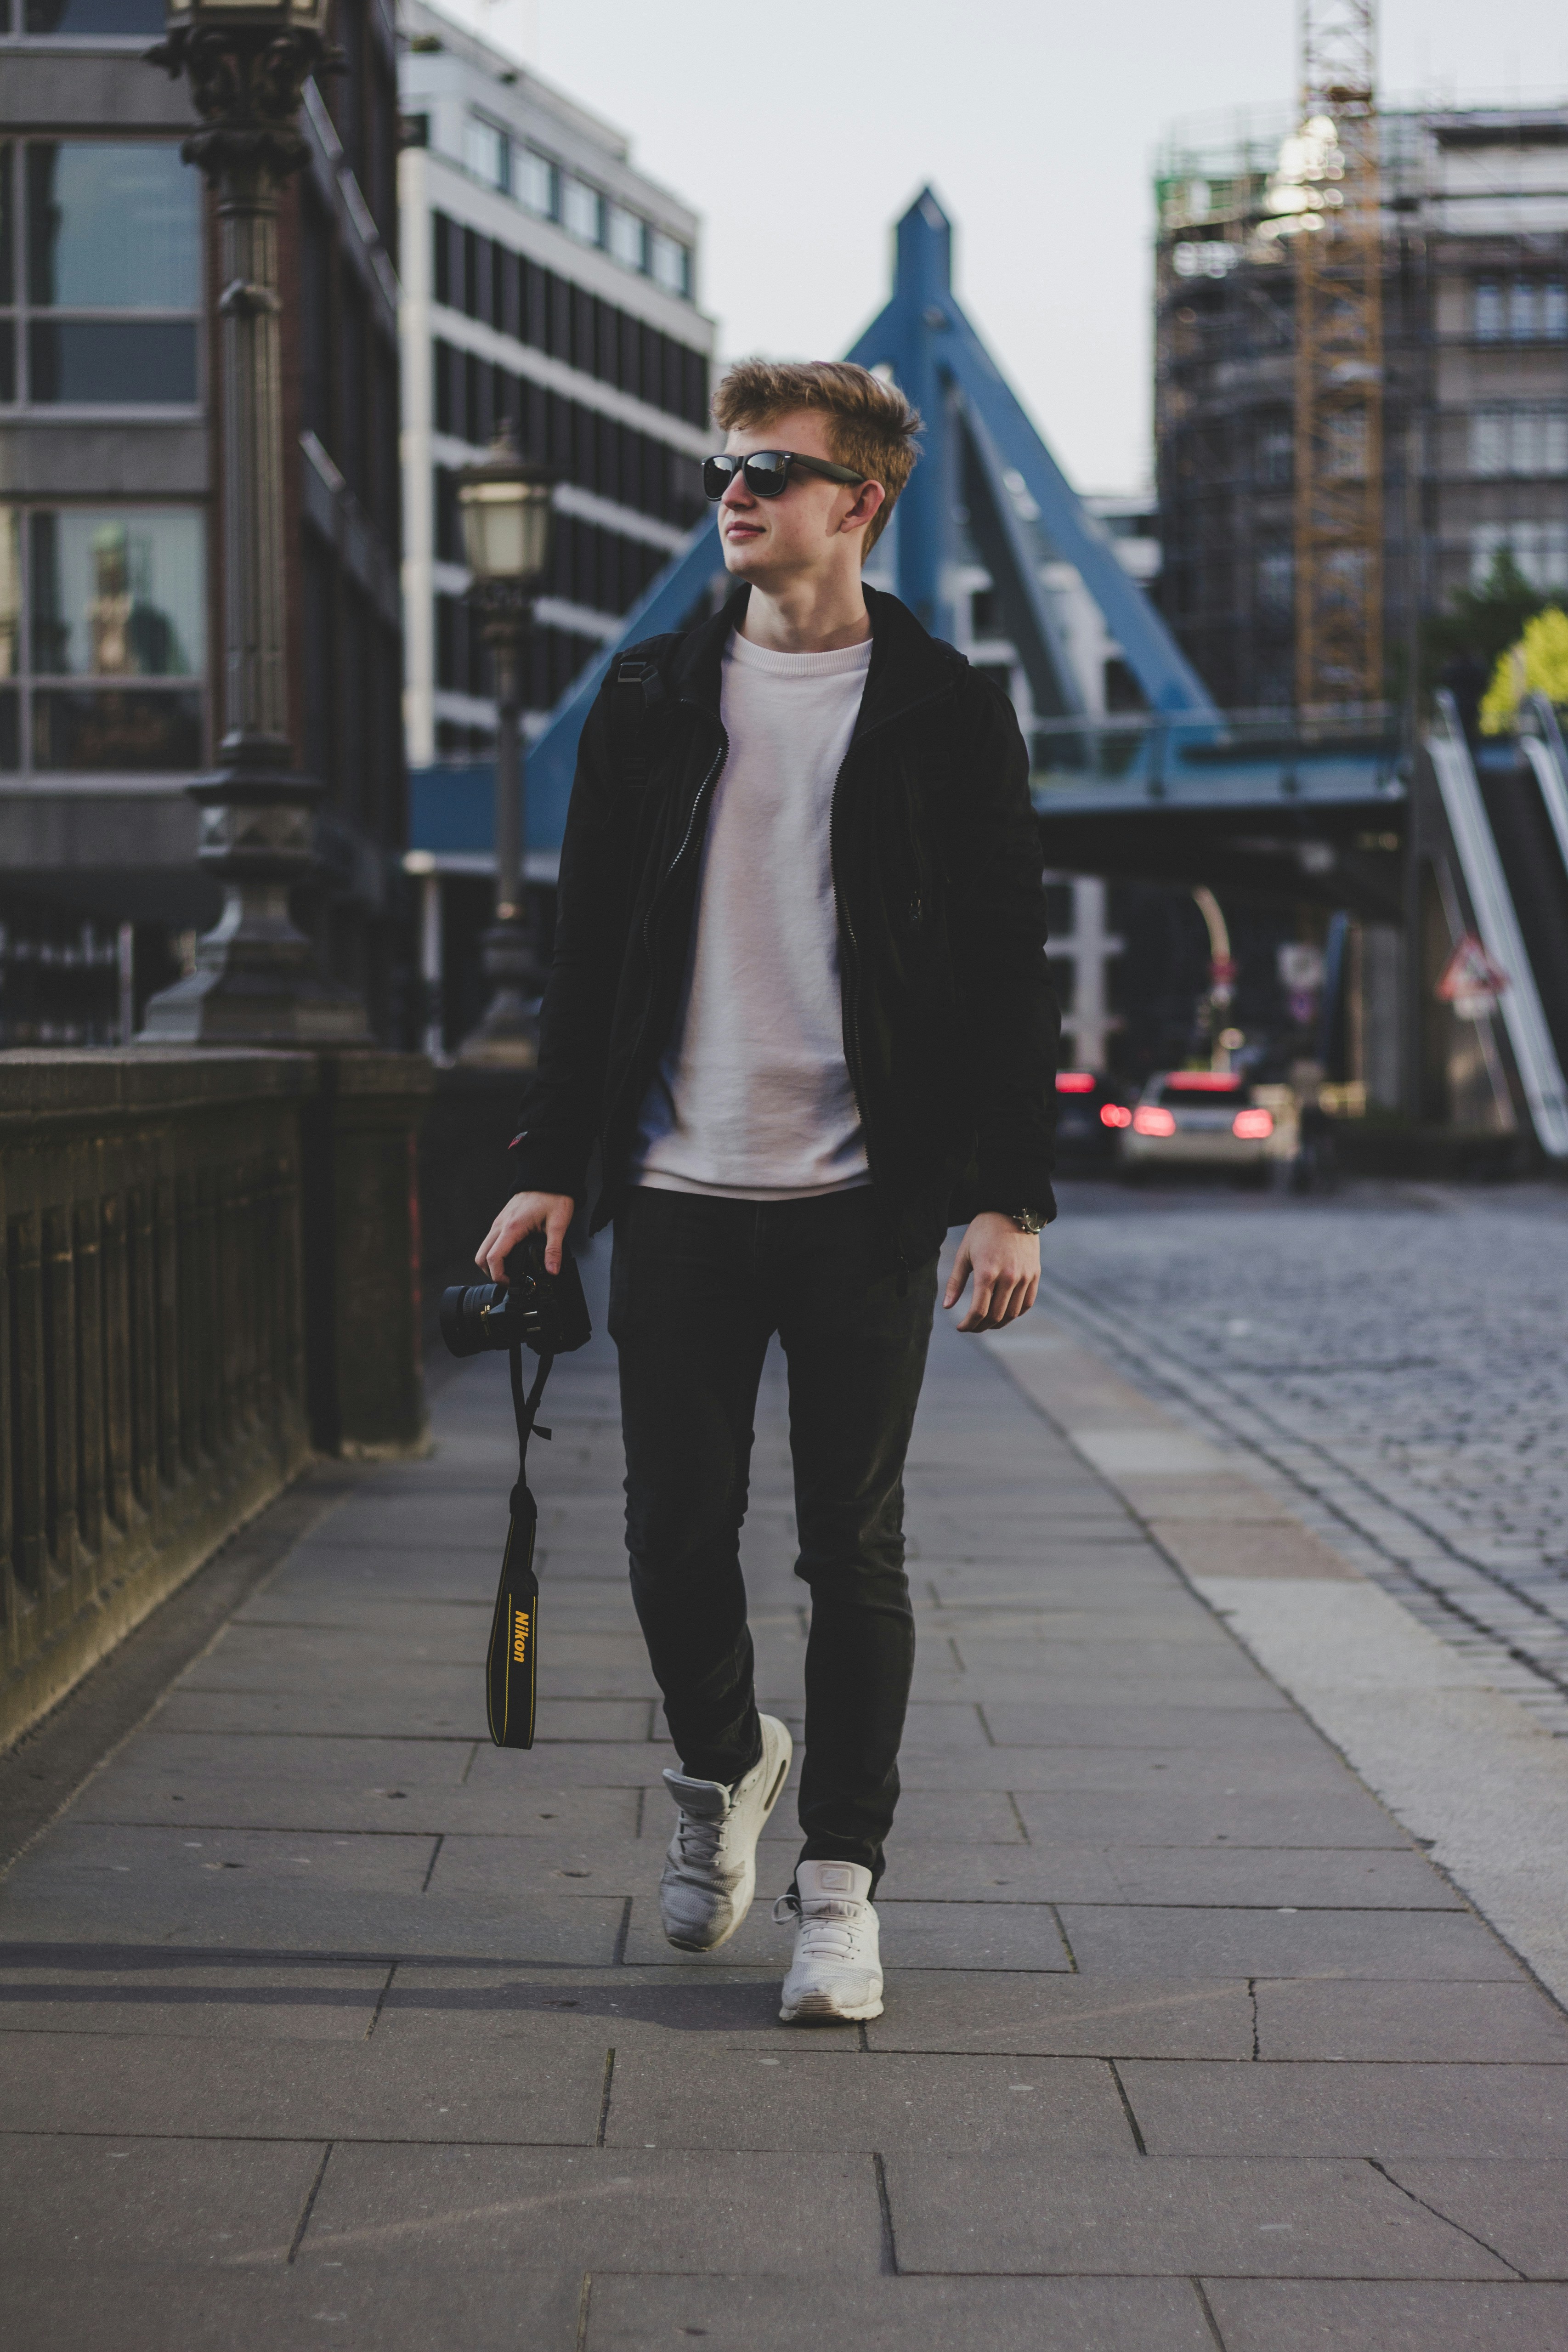 Man walking with a camera